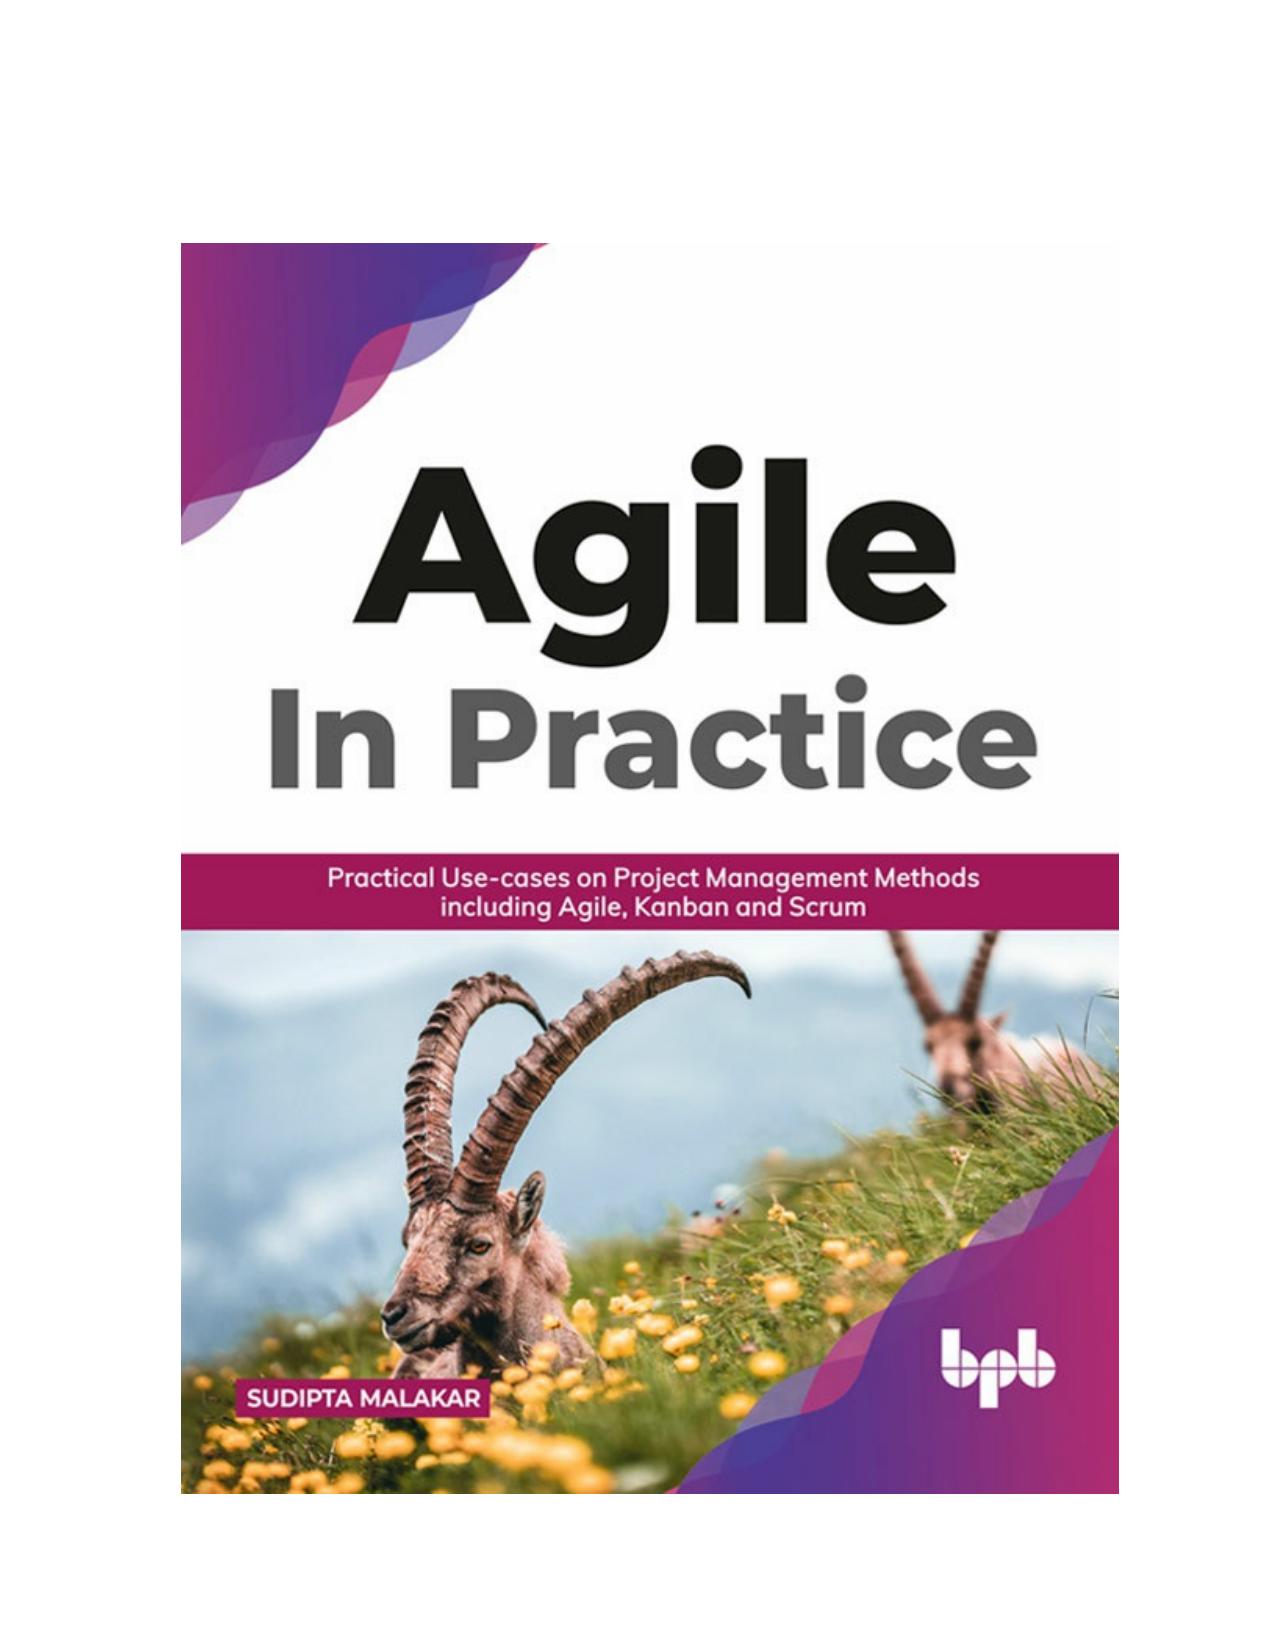 AGILE in Practice: Practical Use-Cases on Project Management Methods Including Agile, Kanban and Scrum (English Edition)